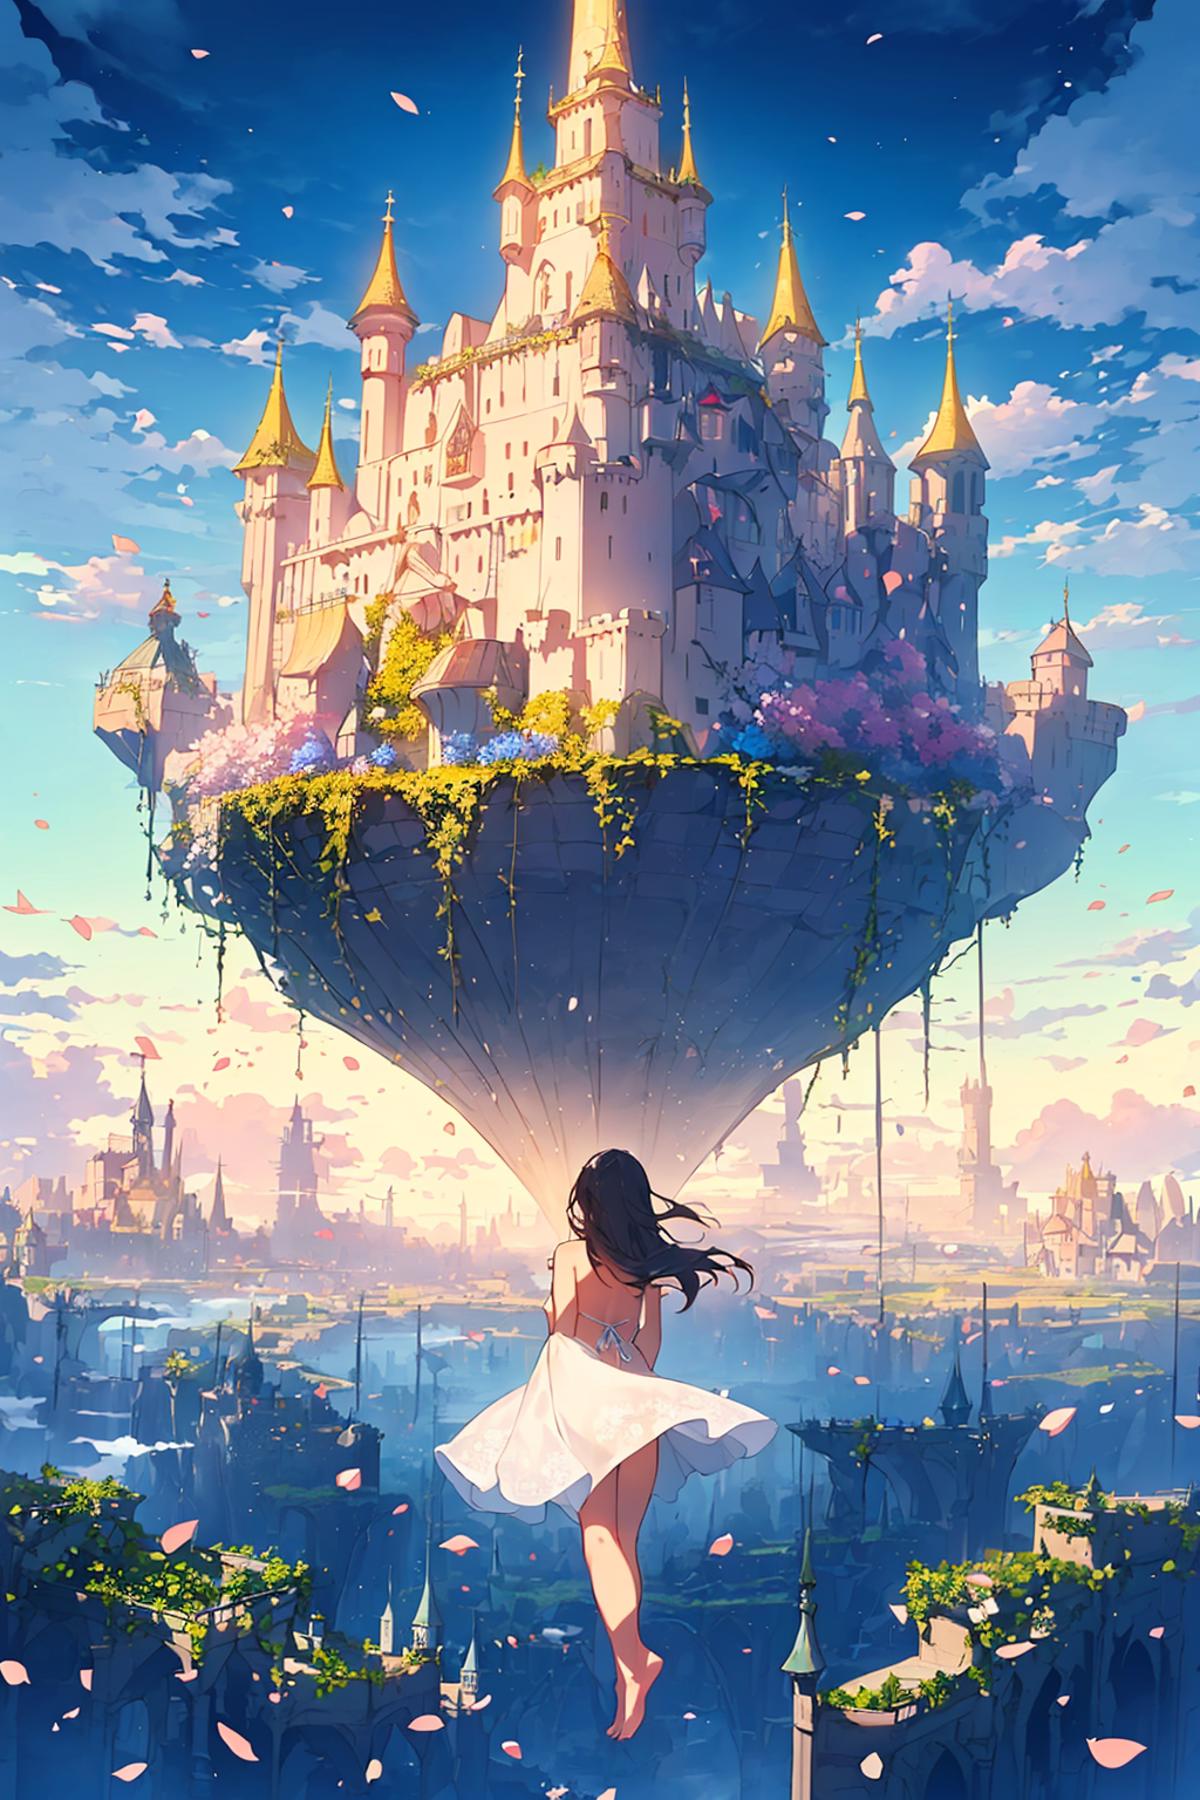 A woman standing on a hot air balloon flying over a castle.